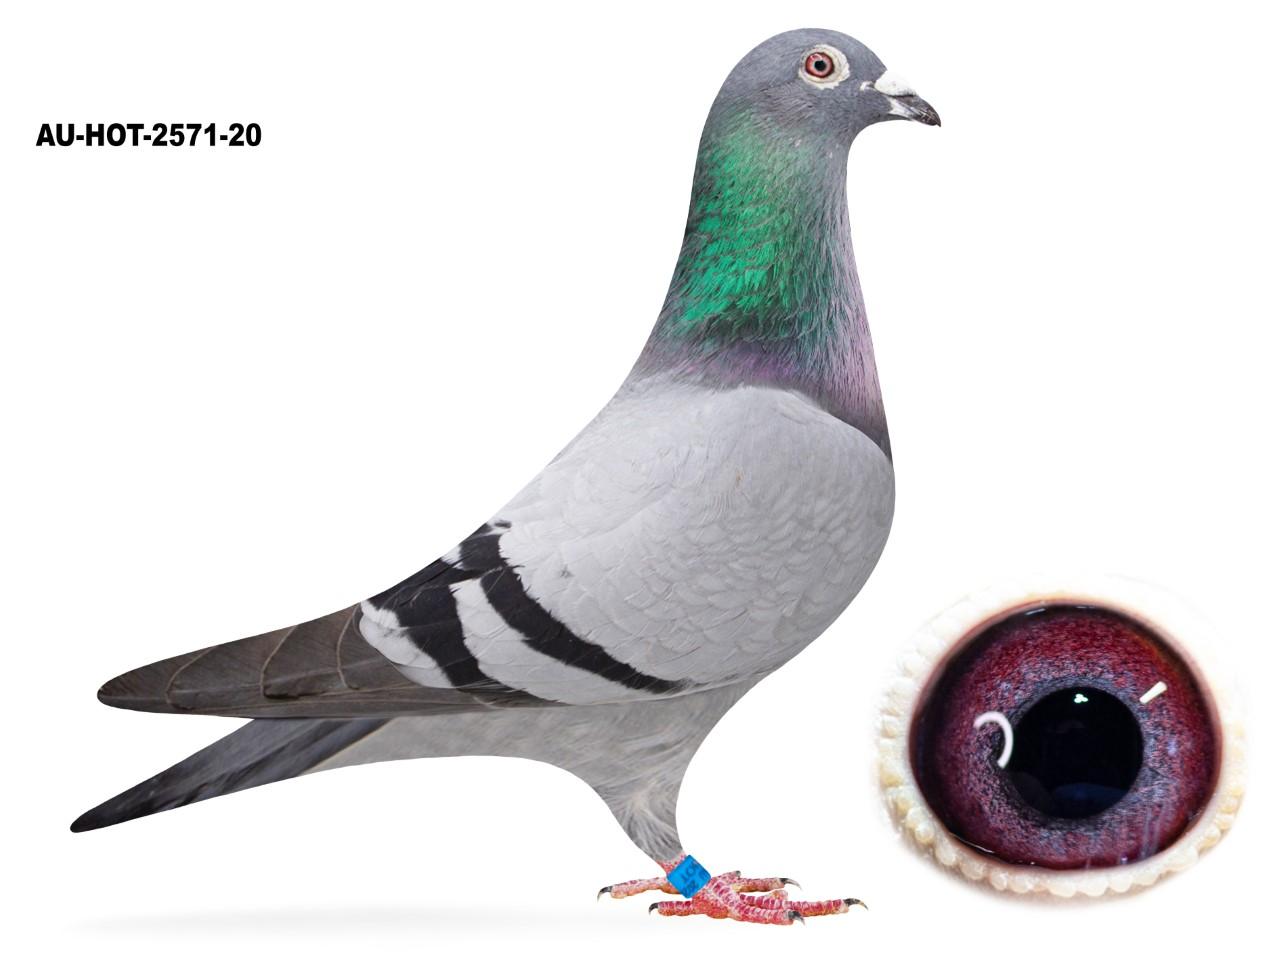 21 HOT 2571 Herbots OLR Performance Pigeon